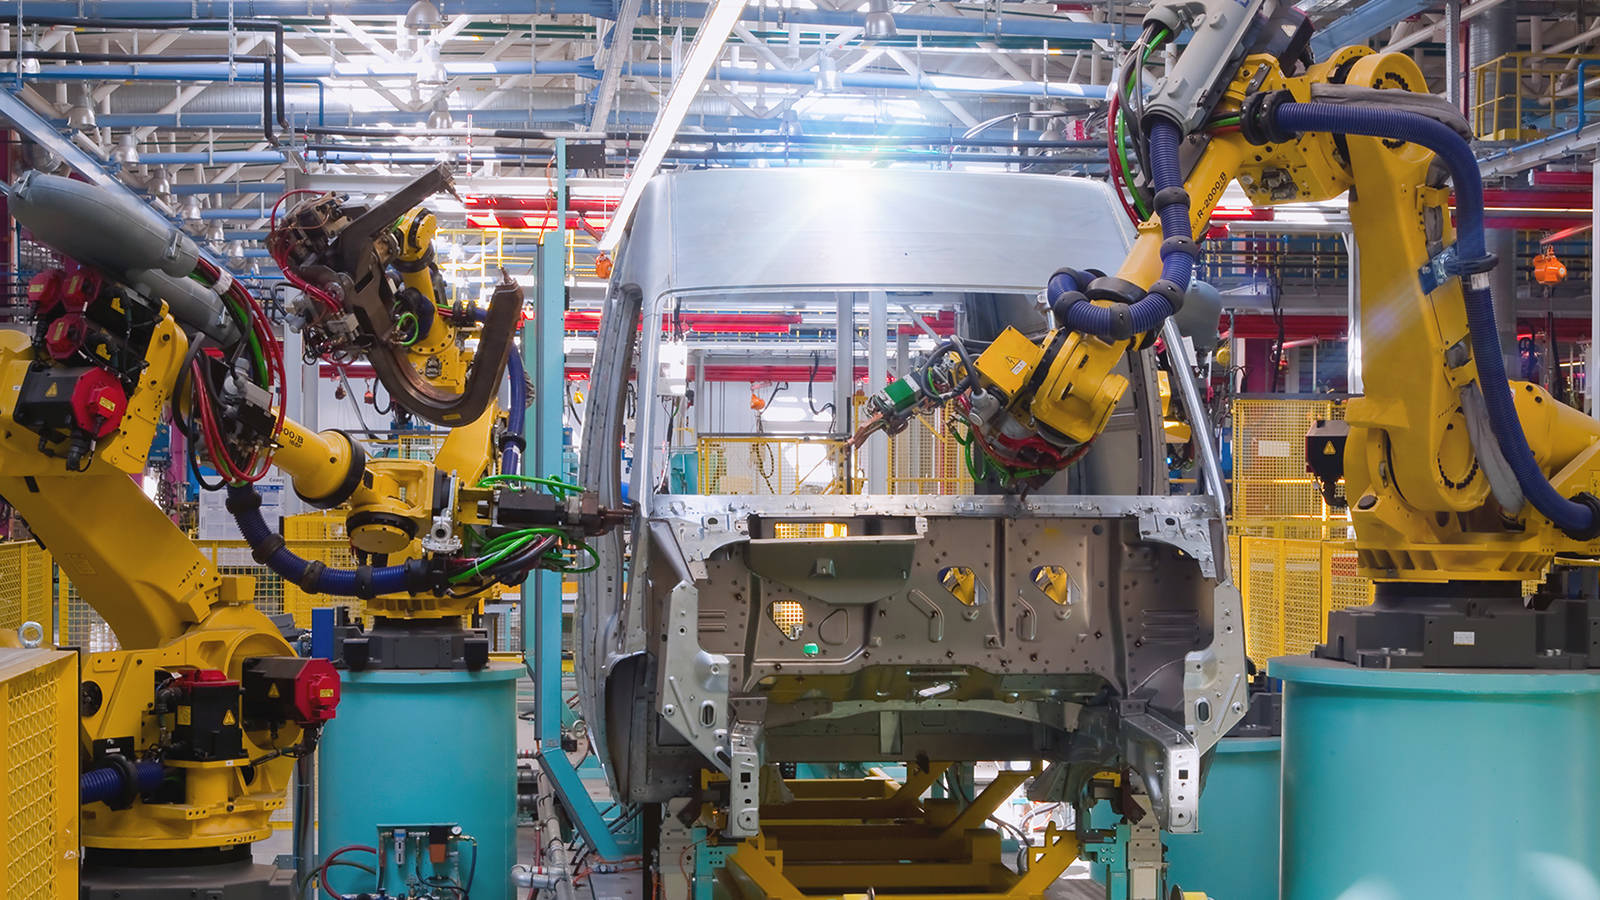 An industrial automation system for vehicle manufacturing